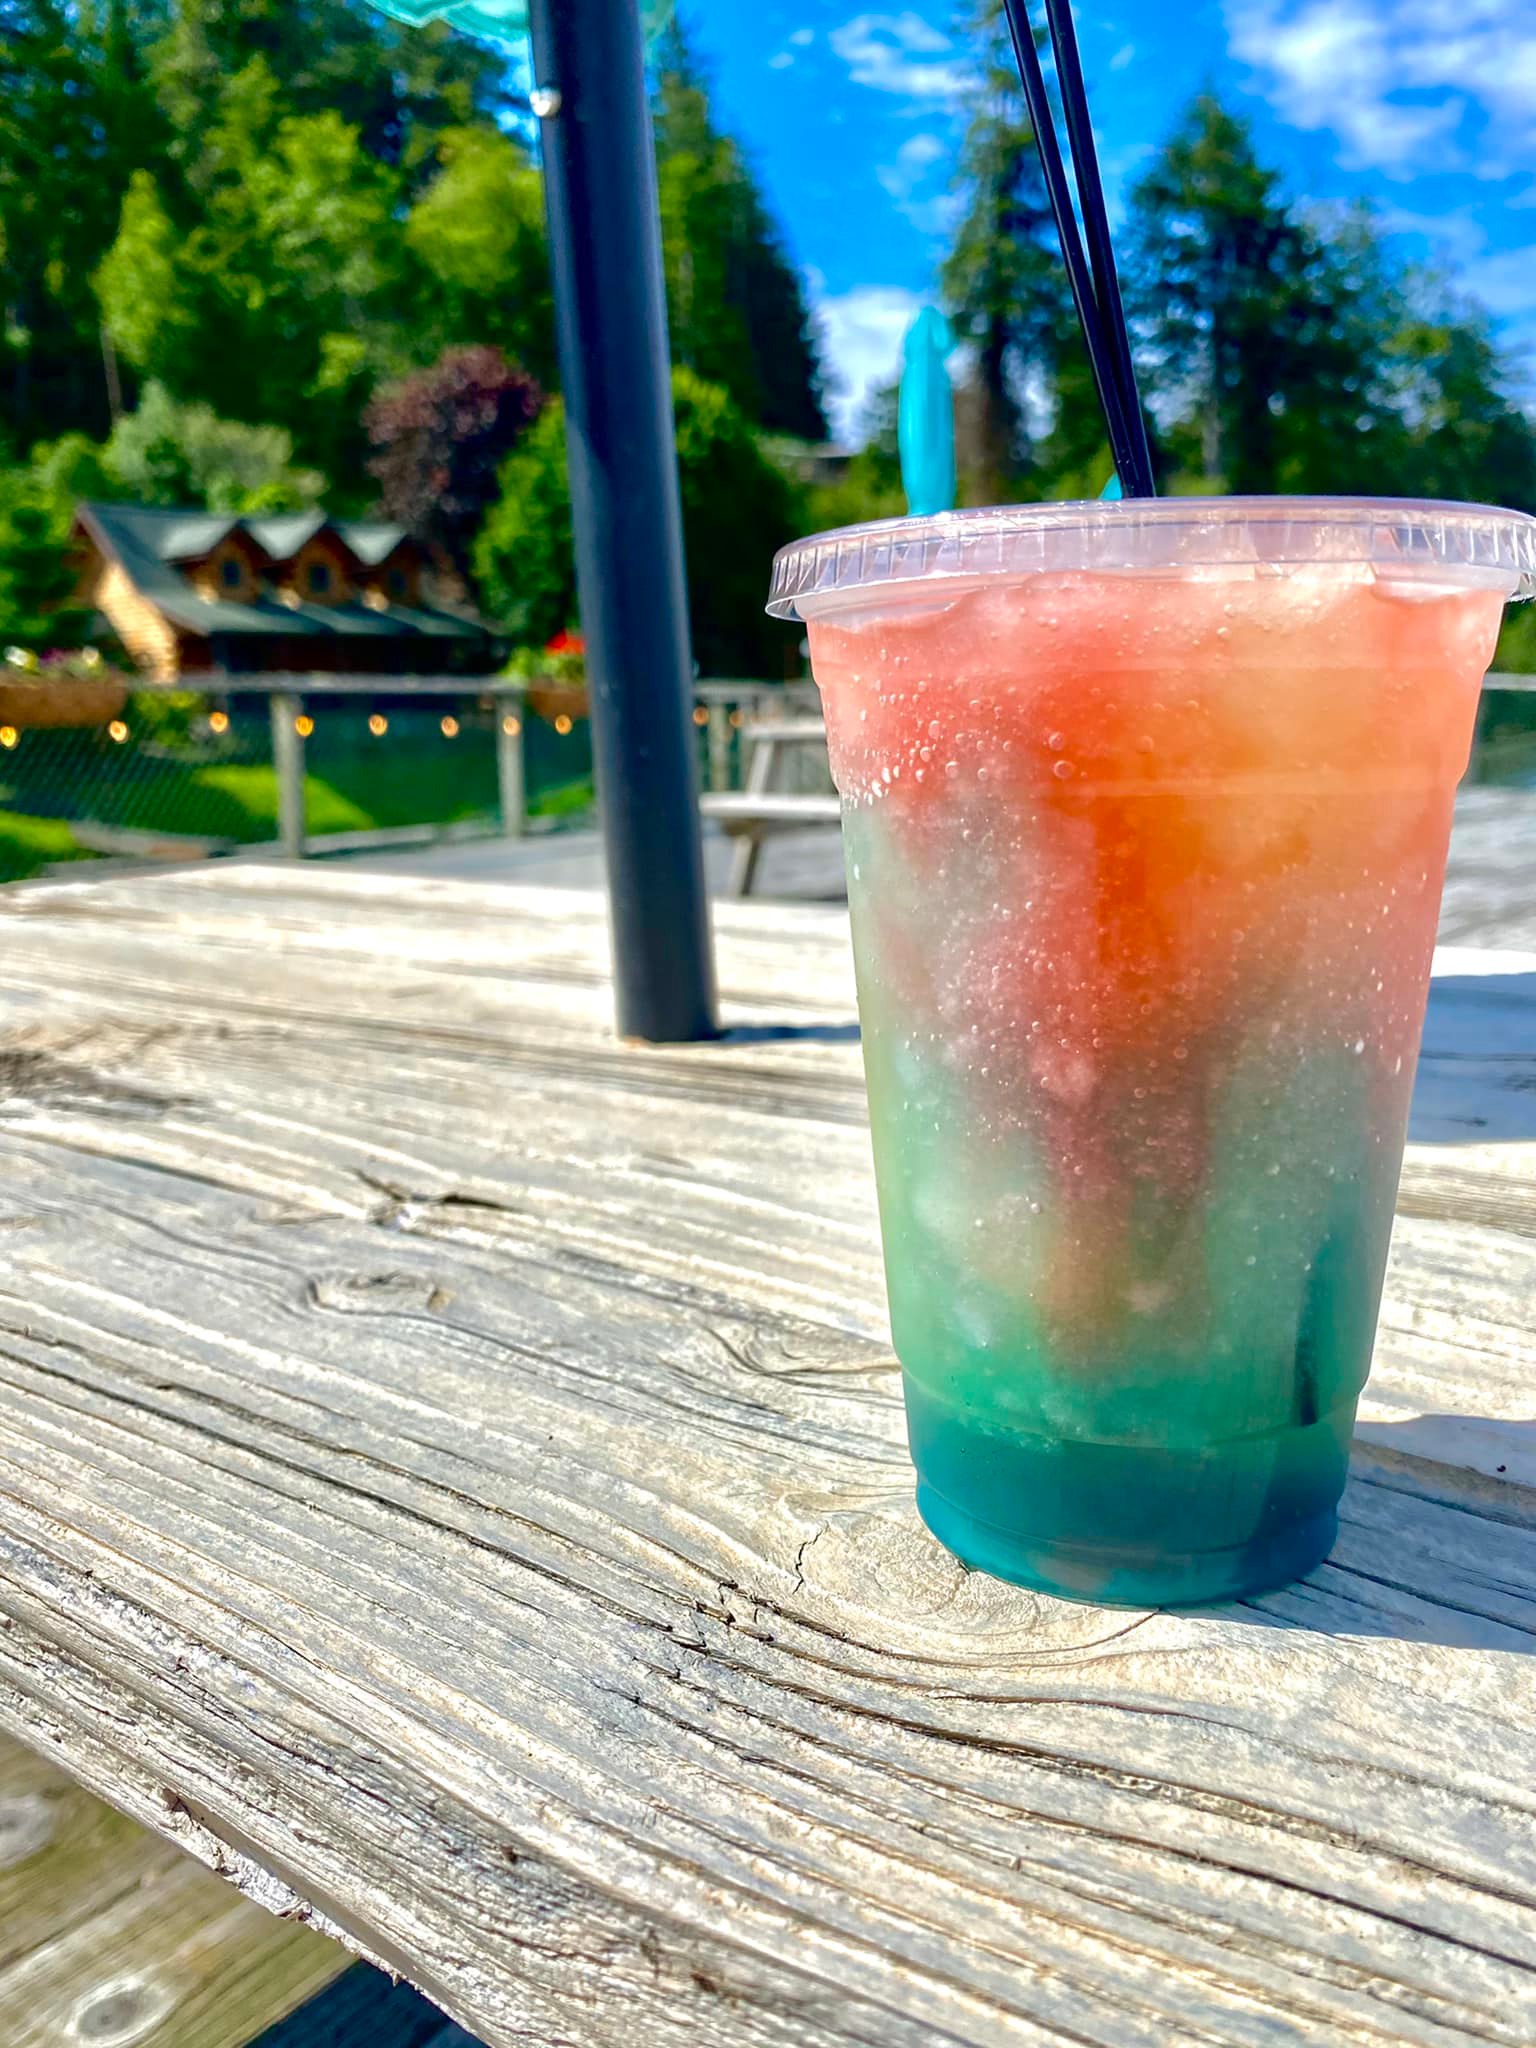 Cold, fruity drink at Coasters Coffee in Lakeside, Oregon